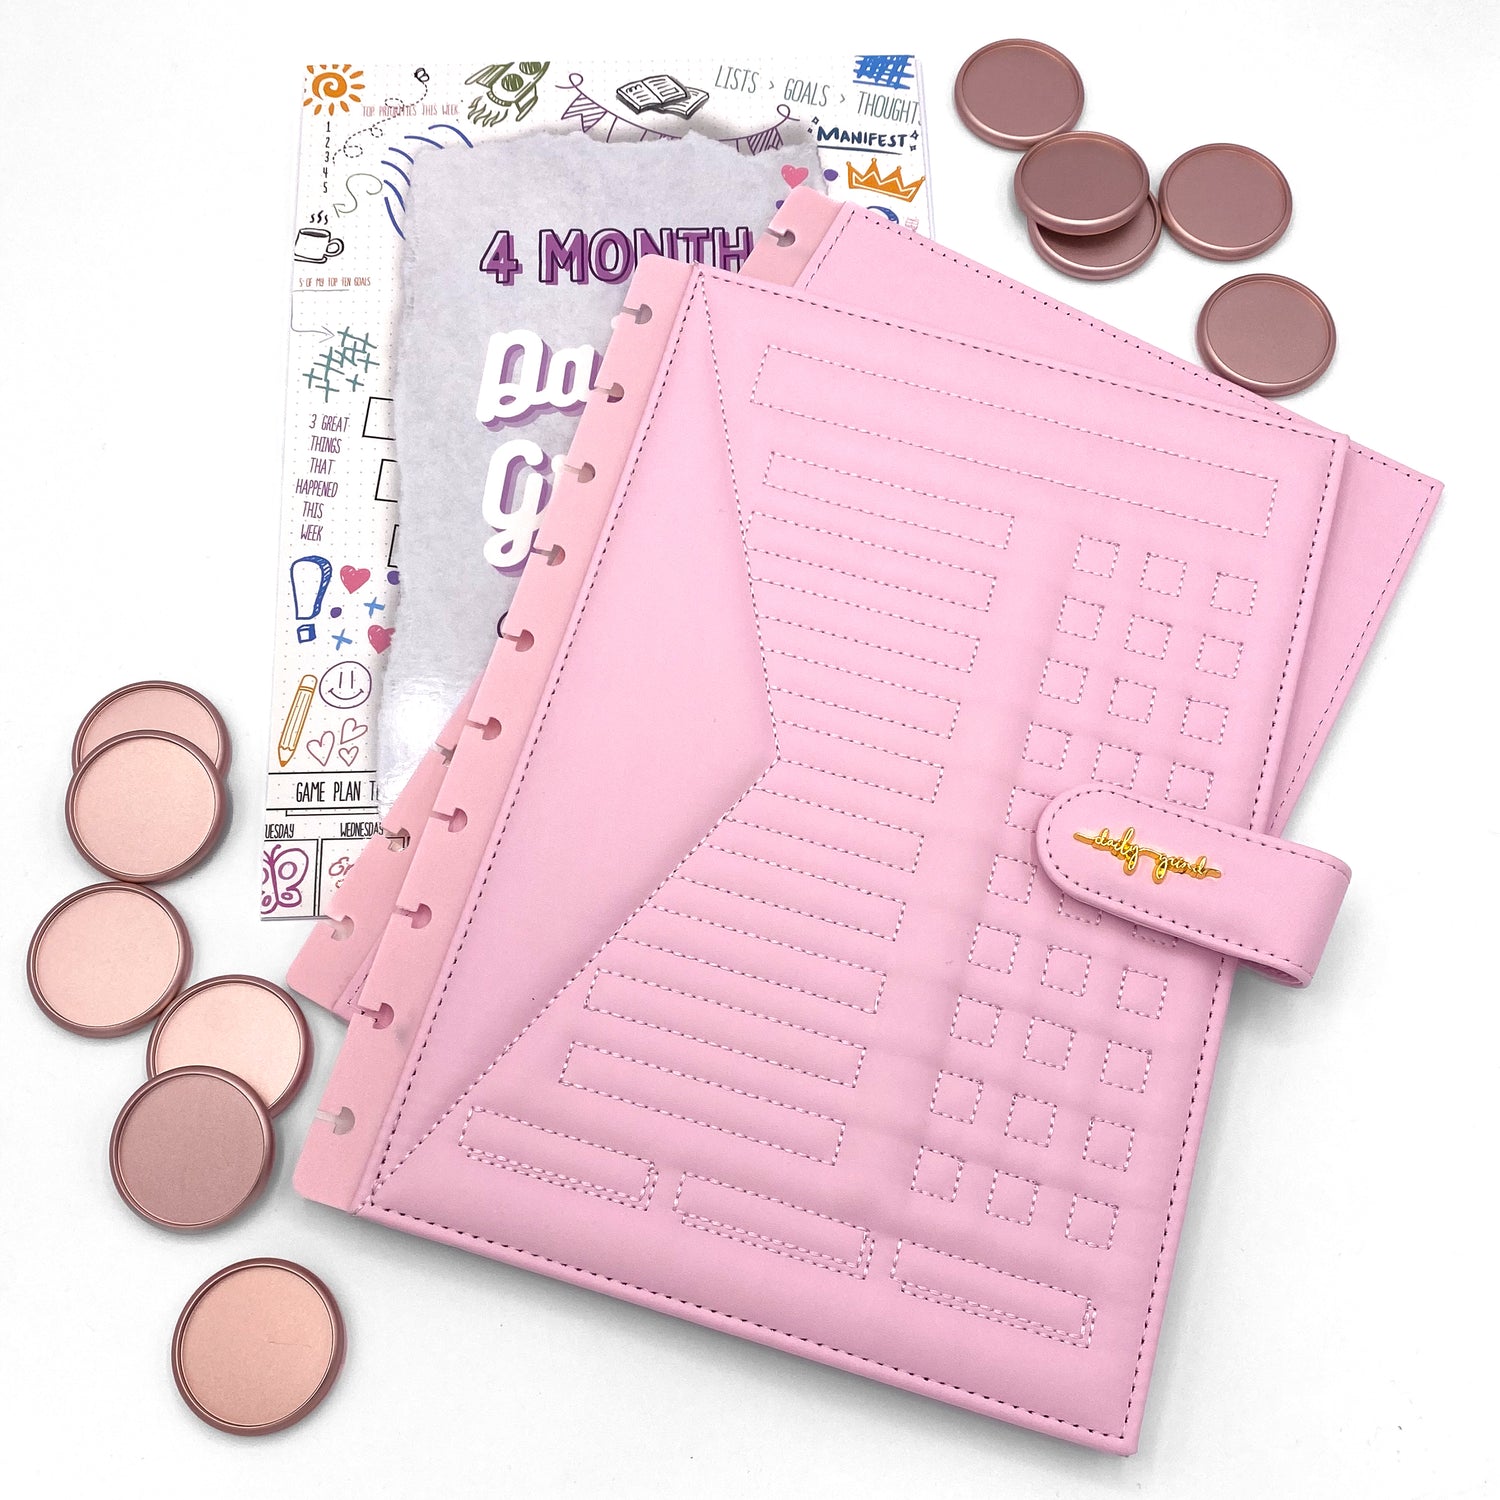 Pink planner cover and discs with &quot;4 Month Daily Grind Sheets&quot; insert